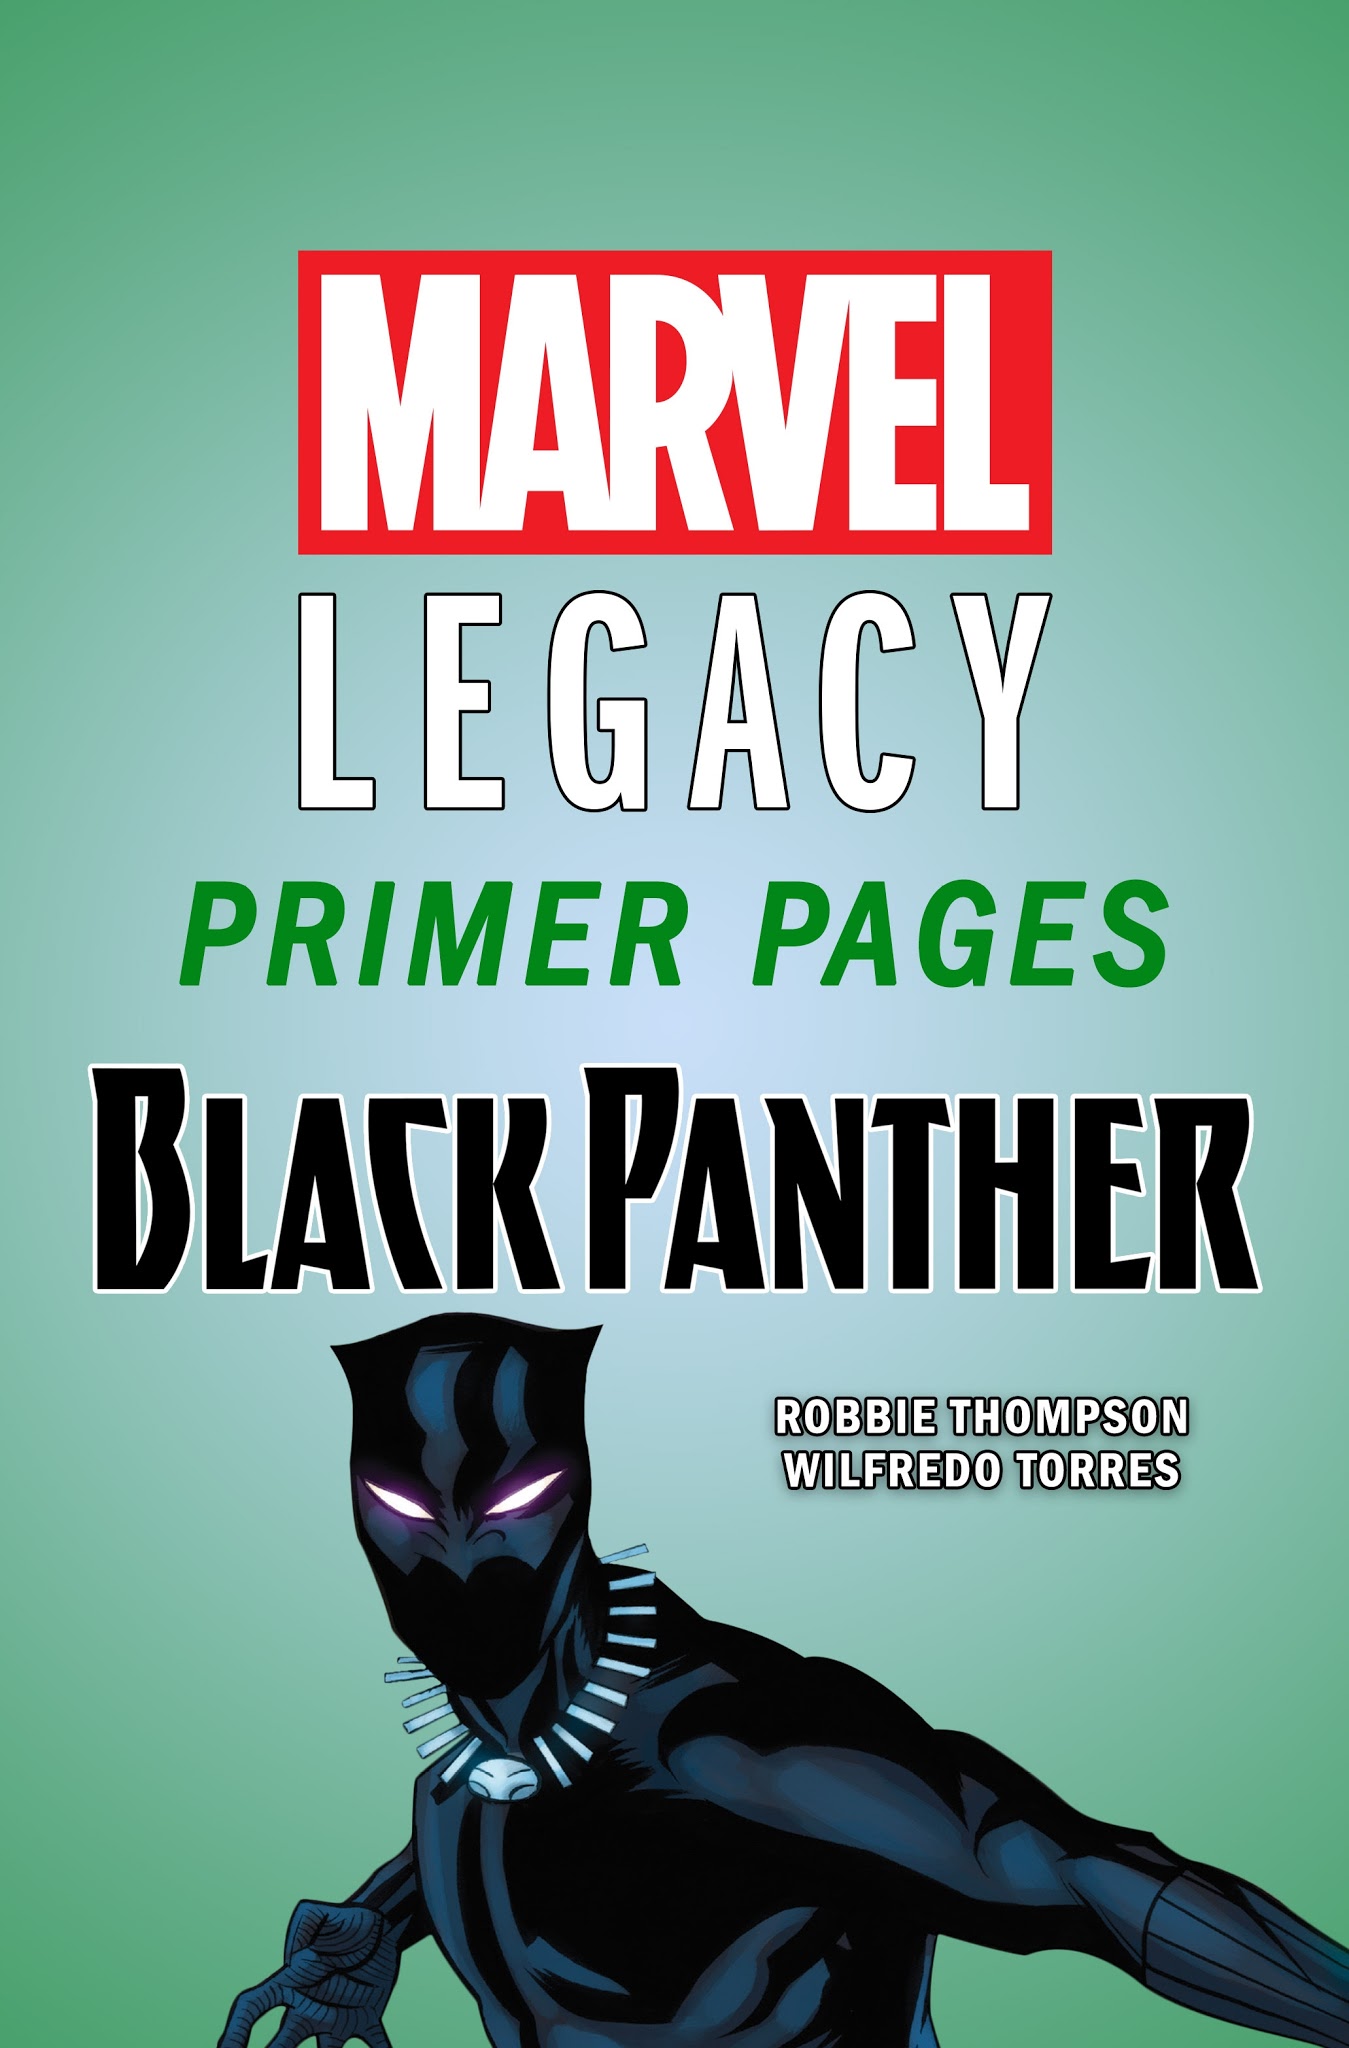 Read online Black Panther (2016) comic -  Issue # _Marvel Legacy Primer Pages - 1